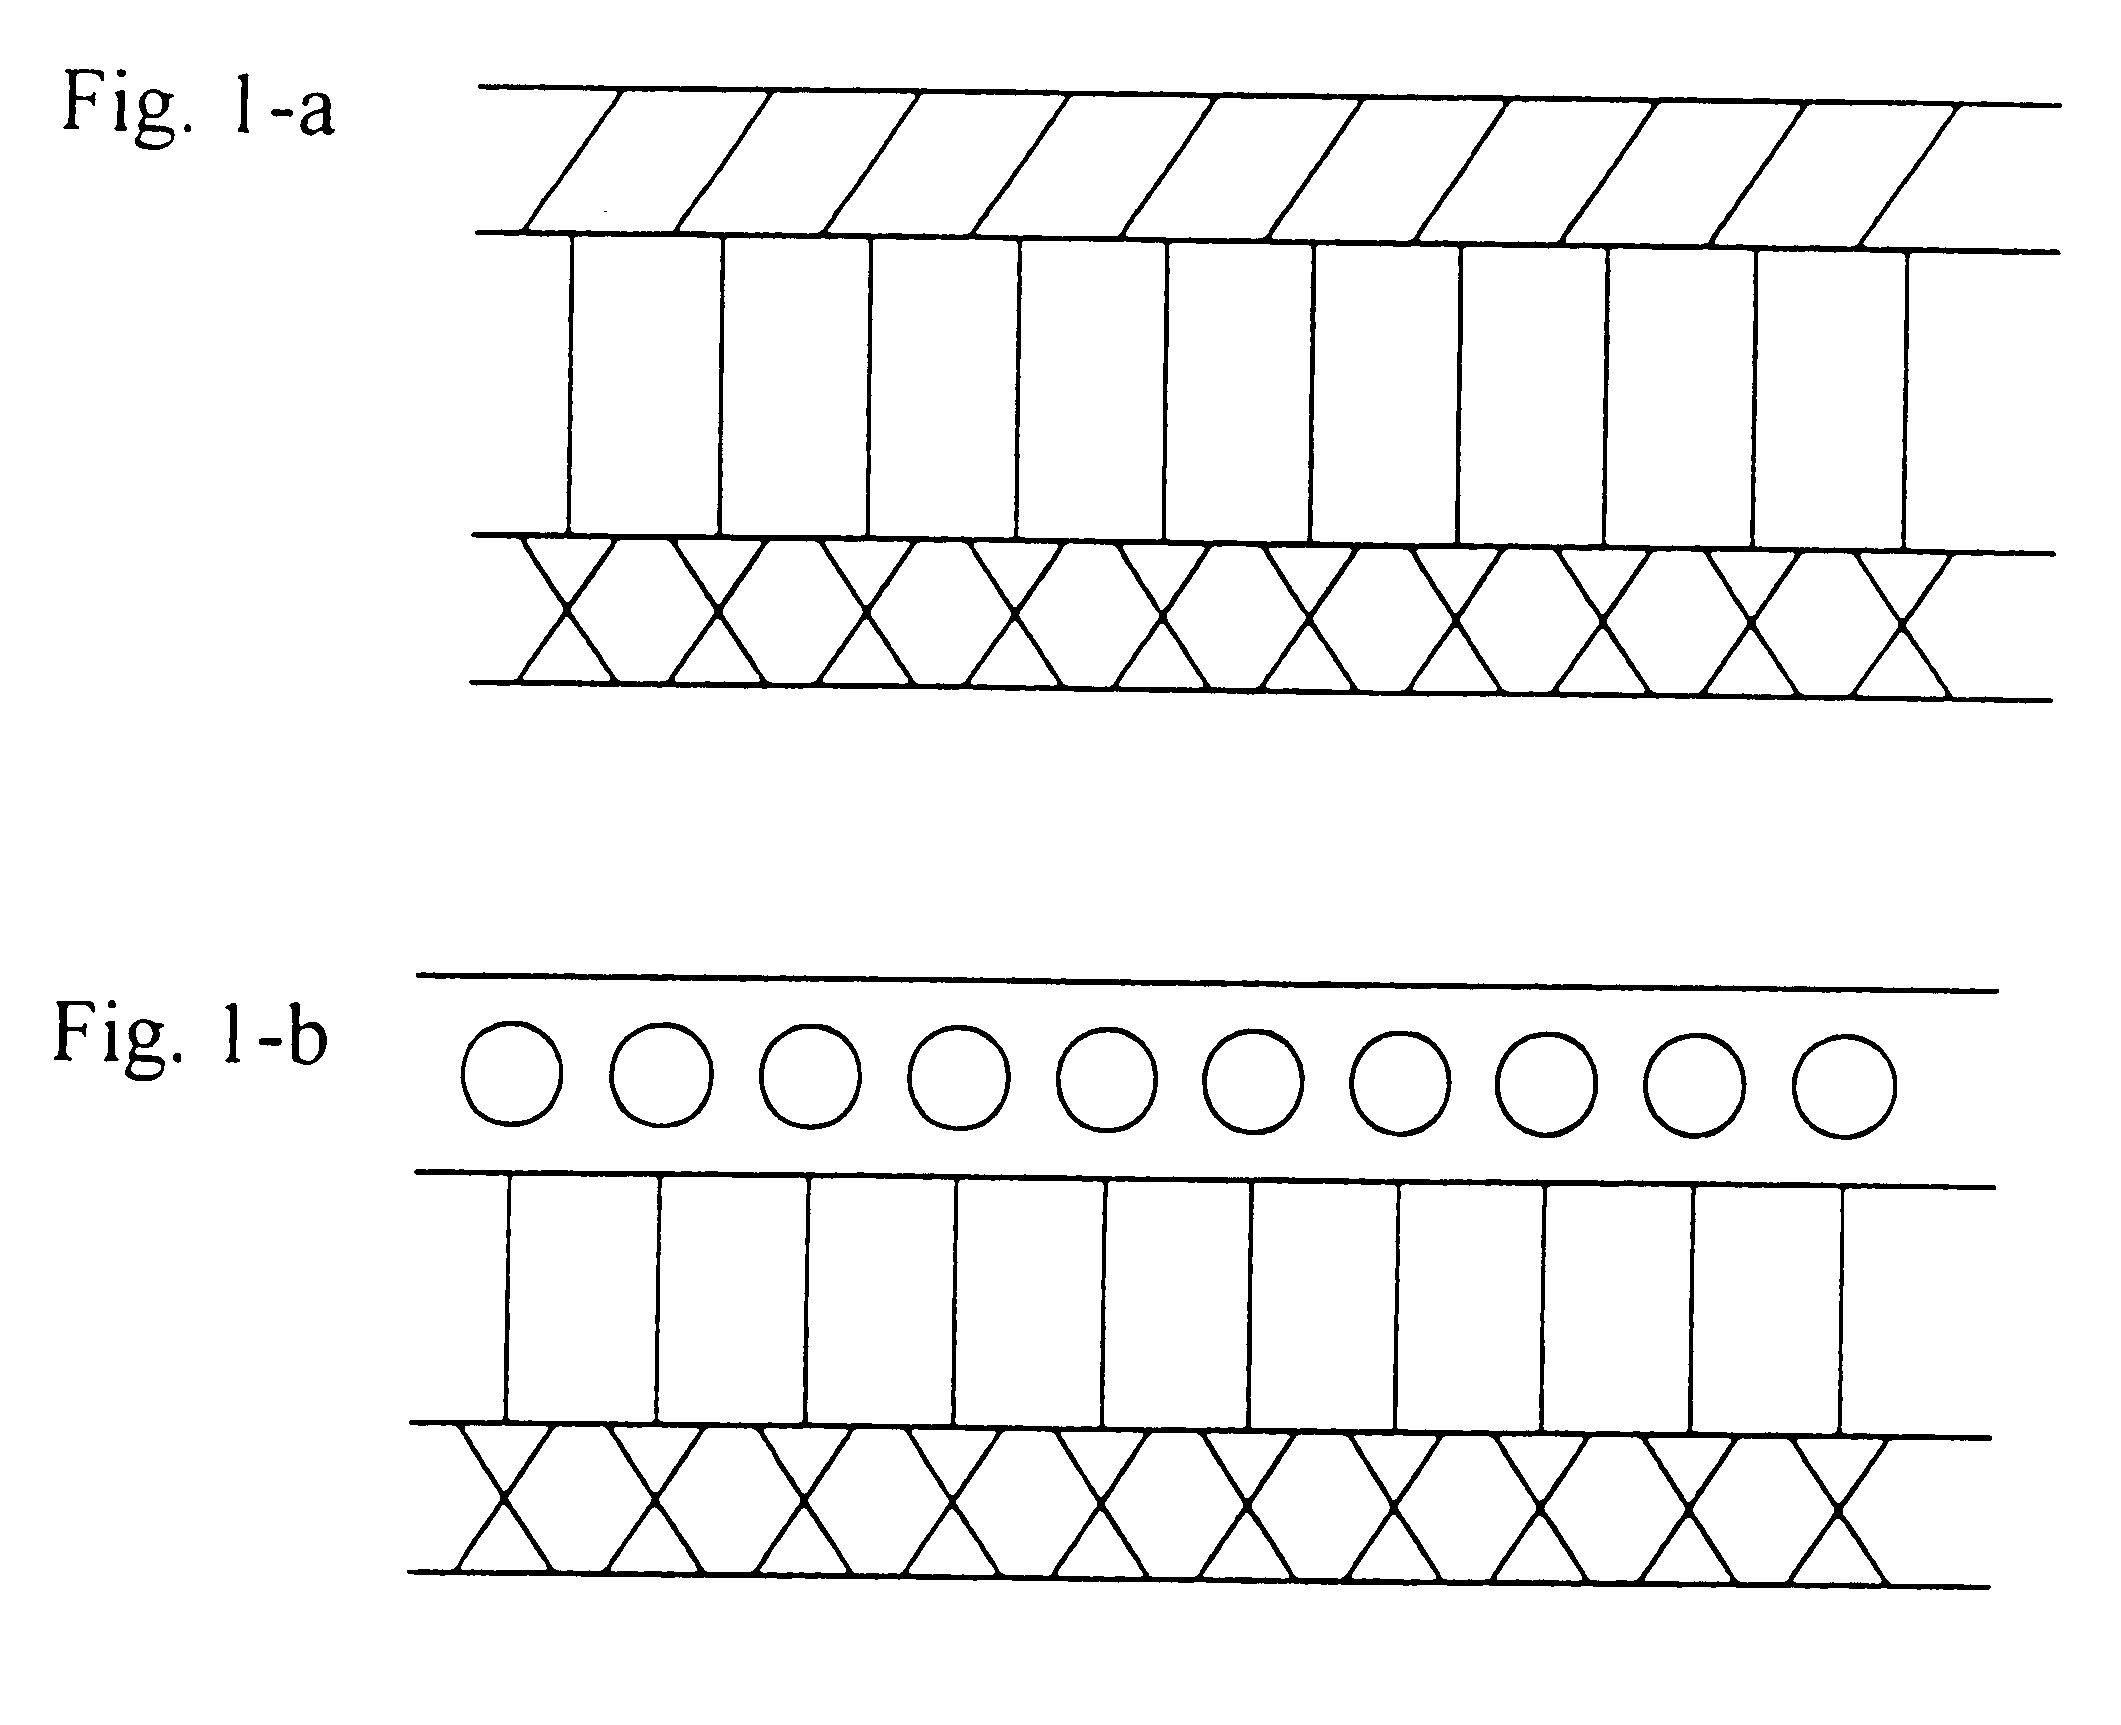 Process for producing a 3-layer co-extruded biaxial-oriented polypropylene synthetic paper and transparent film for in-mold label